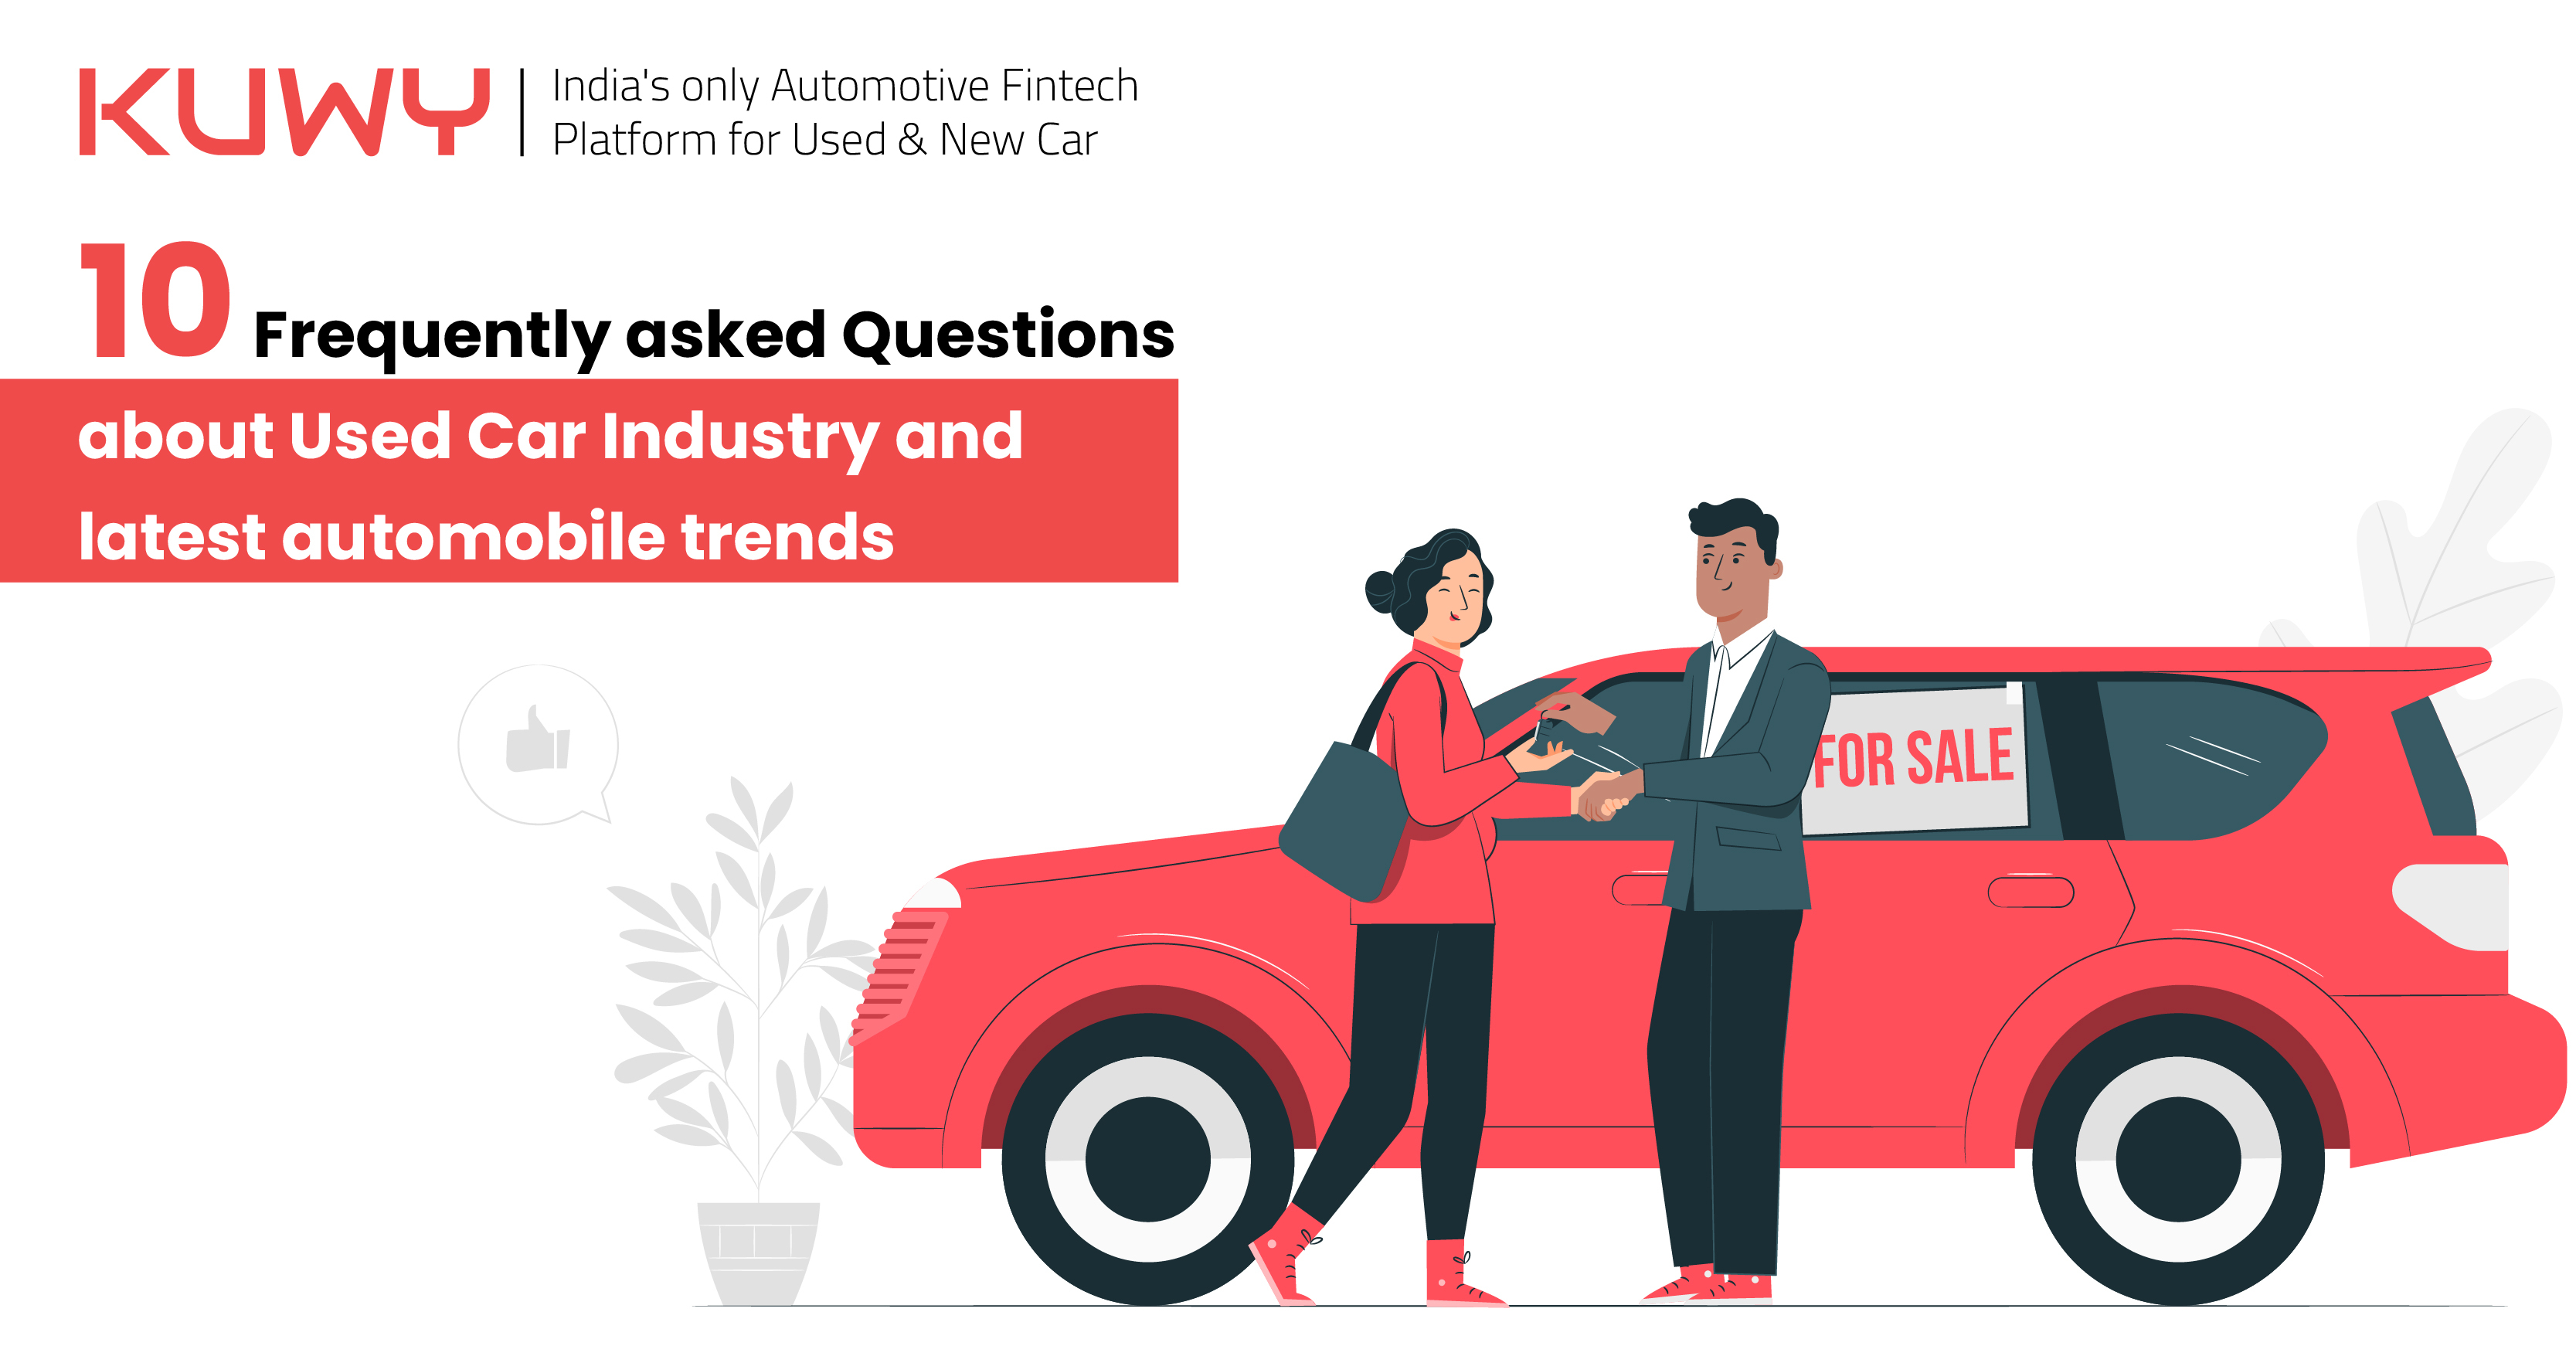 Ten frequently asked questions about the used car industry and the latest automobile trends